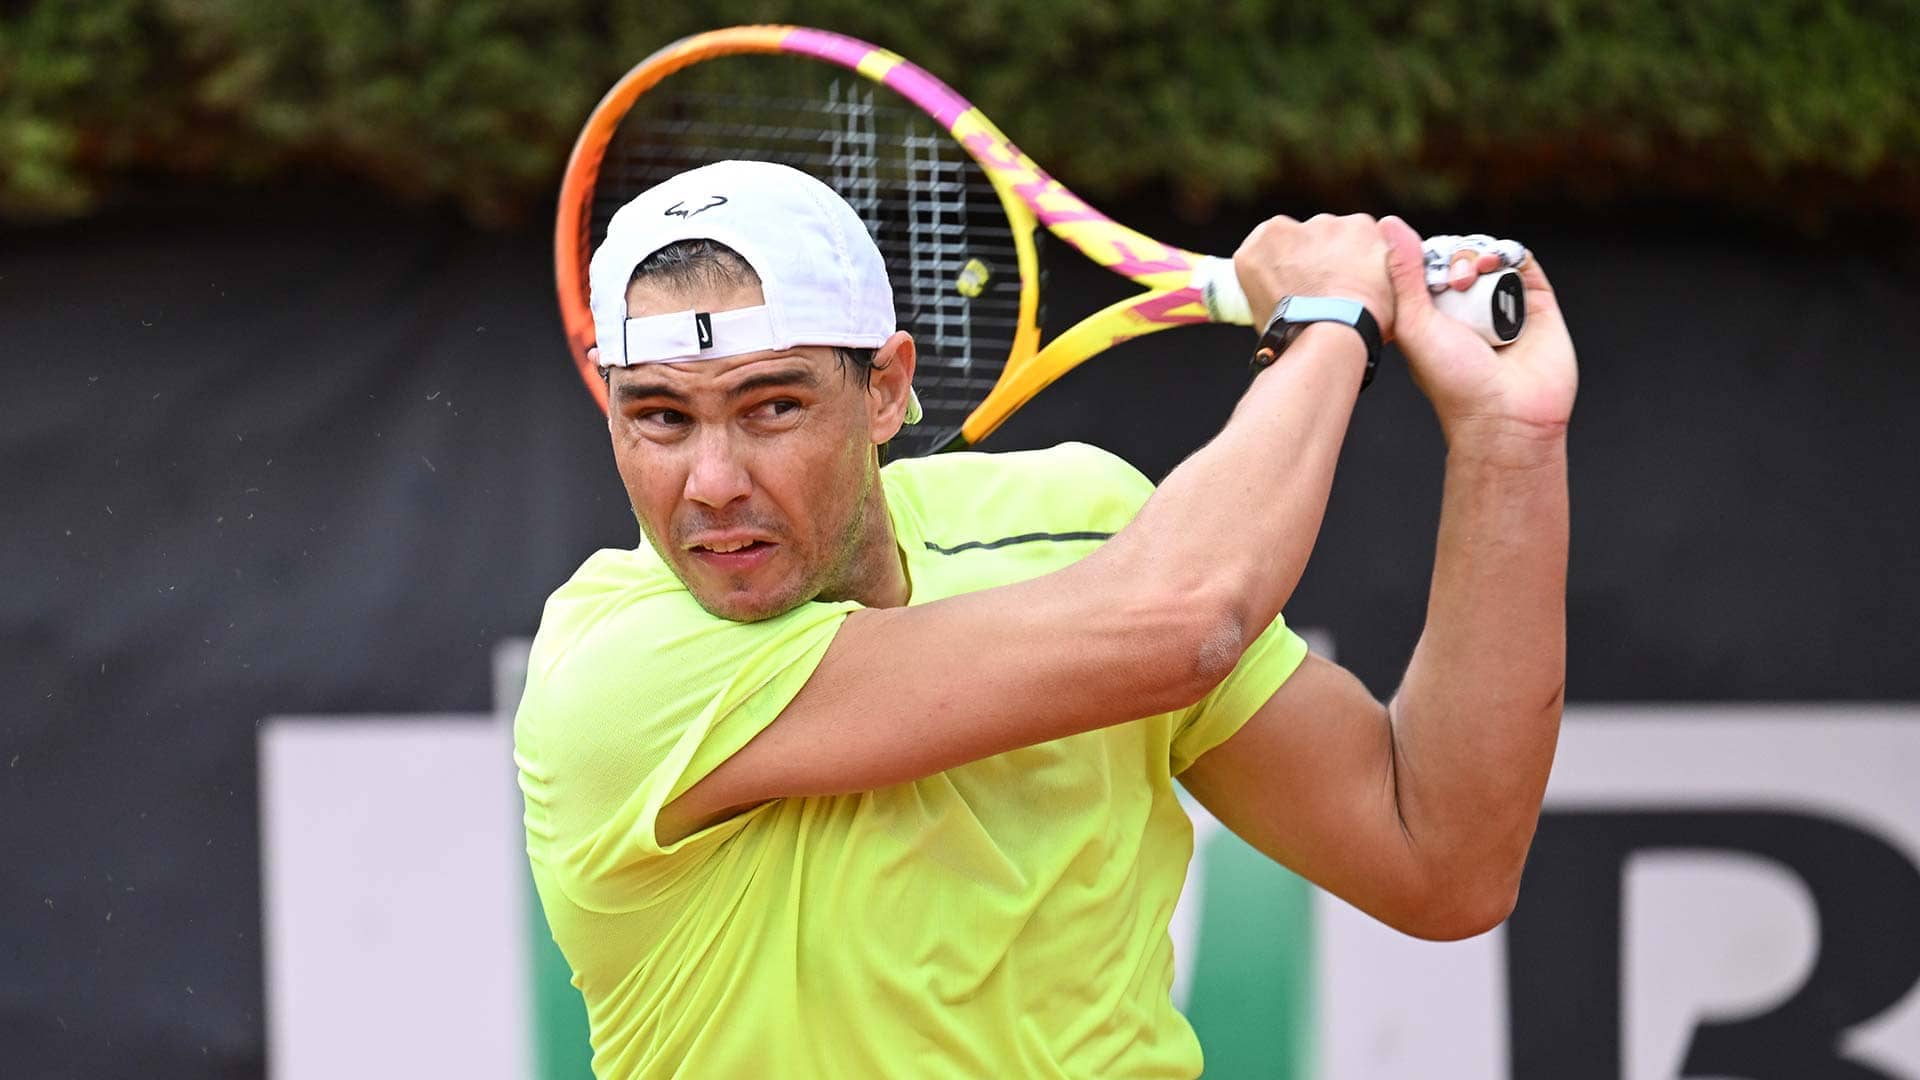 Rafael Nadal will play Zizou Bergs in the first round in Rome on Thursday.